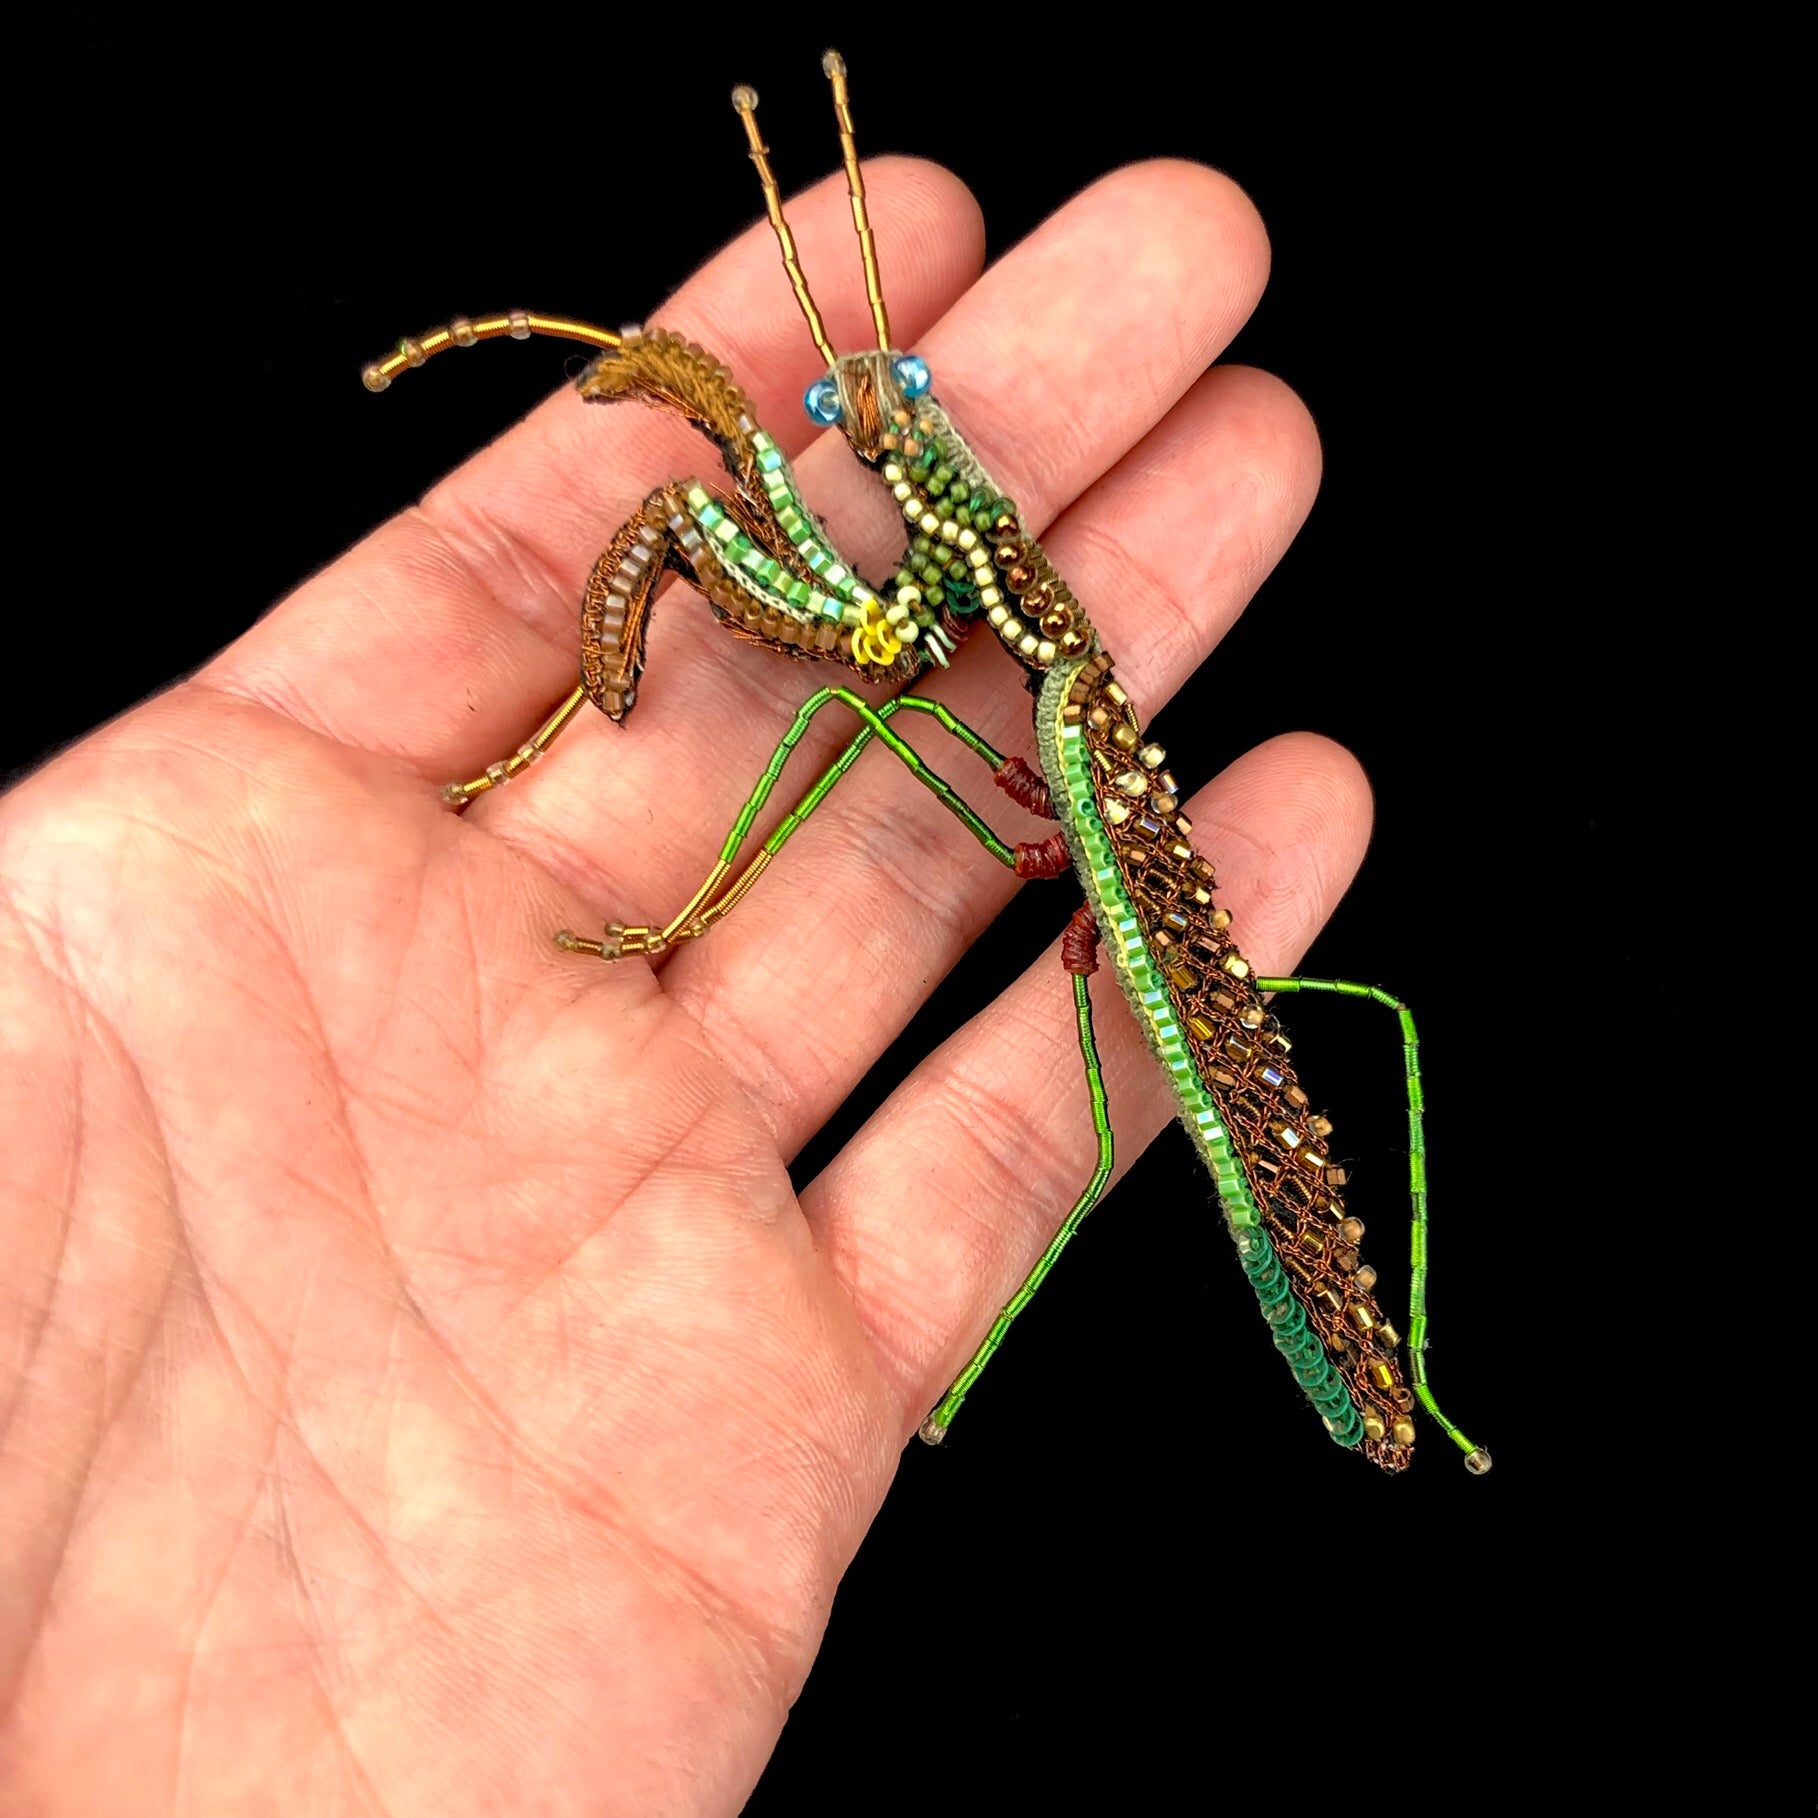 Praying Mantis Brooch Pin shown in hand for size reference